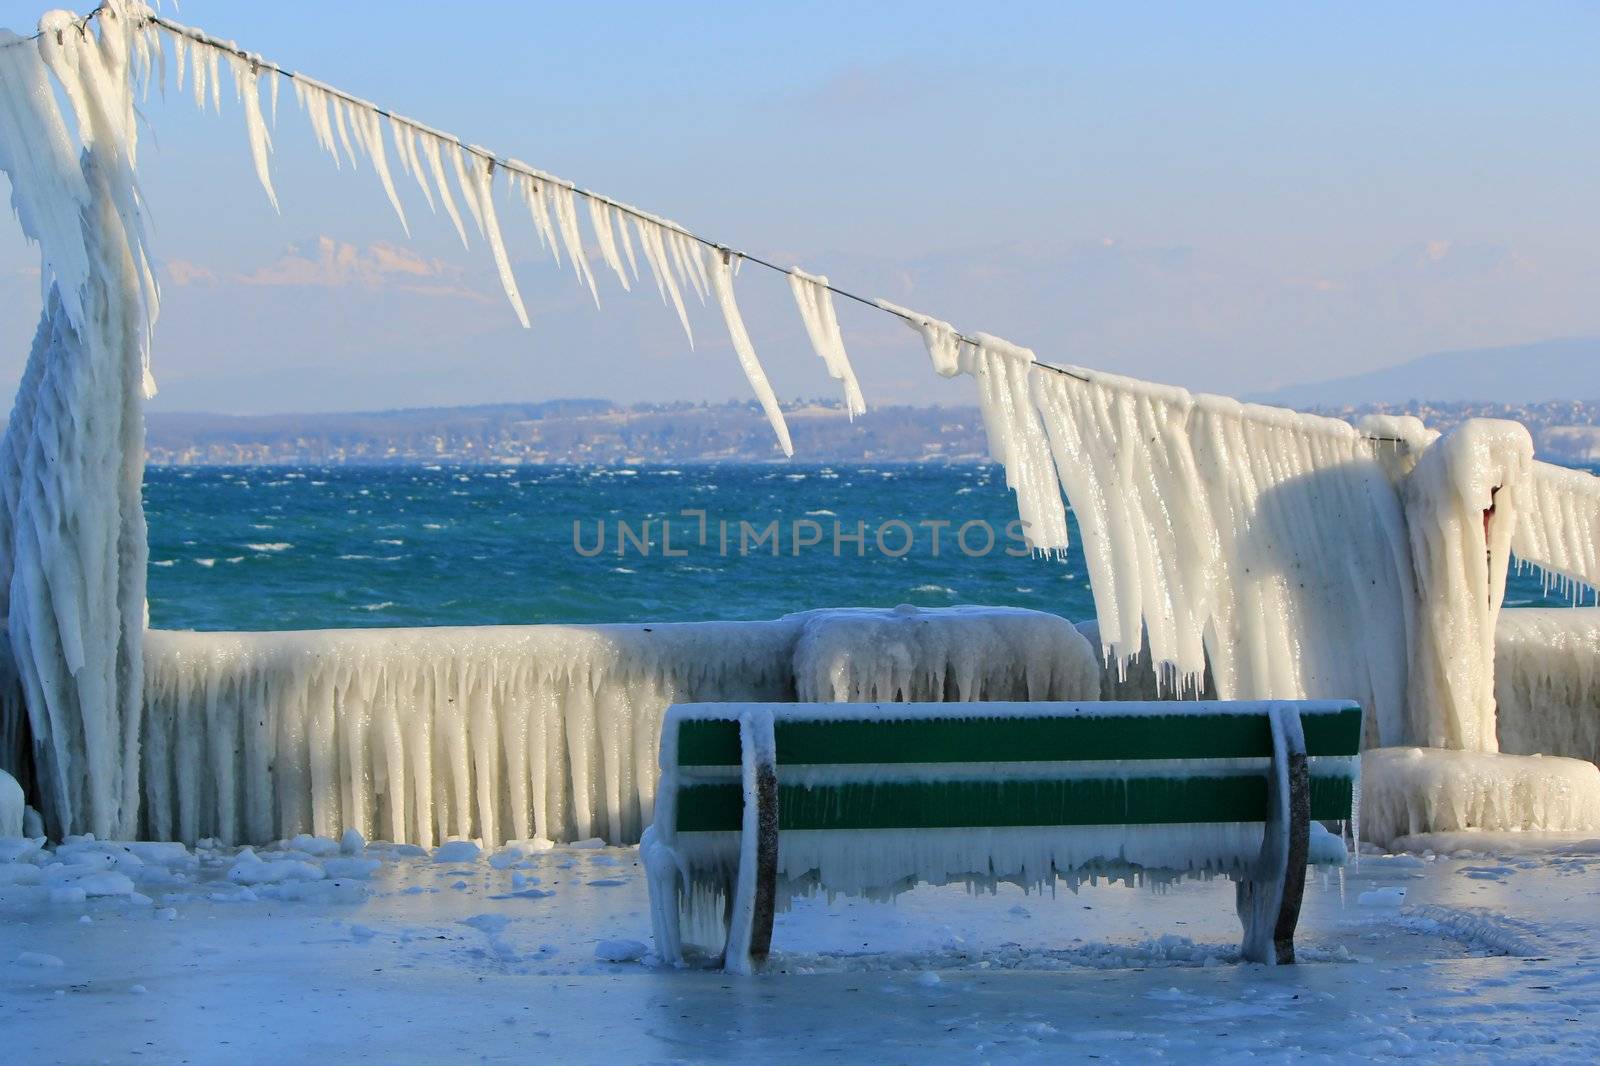 Frozen bench because of cold winter temperature and waves at Nyon, Switzerland